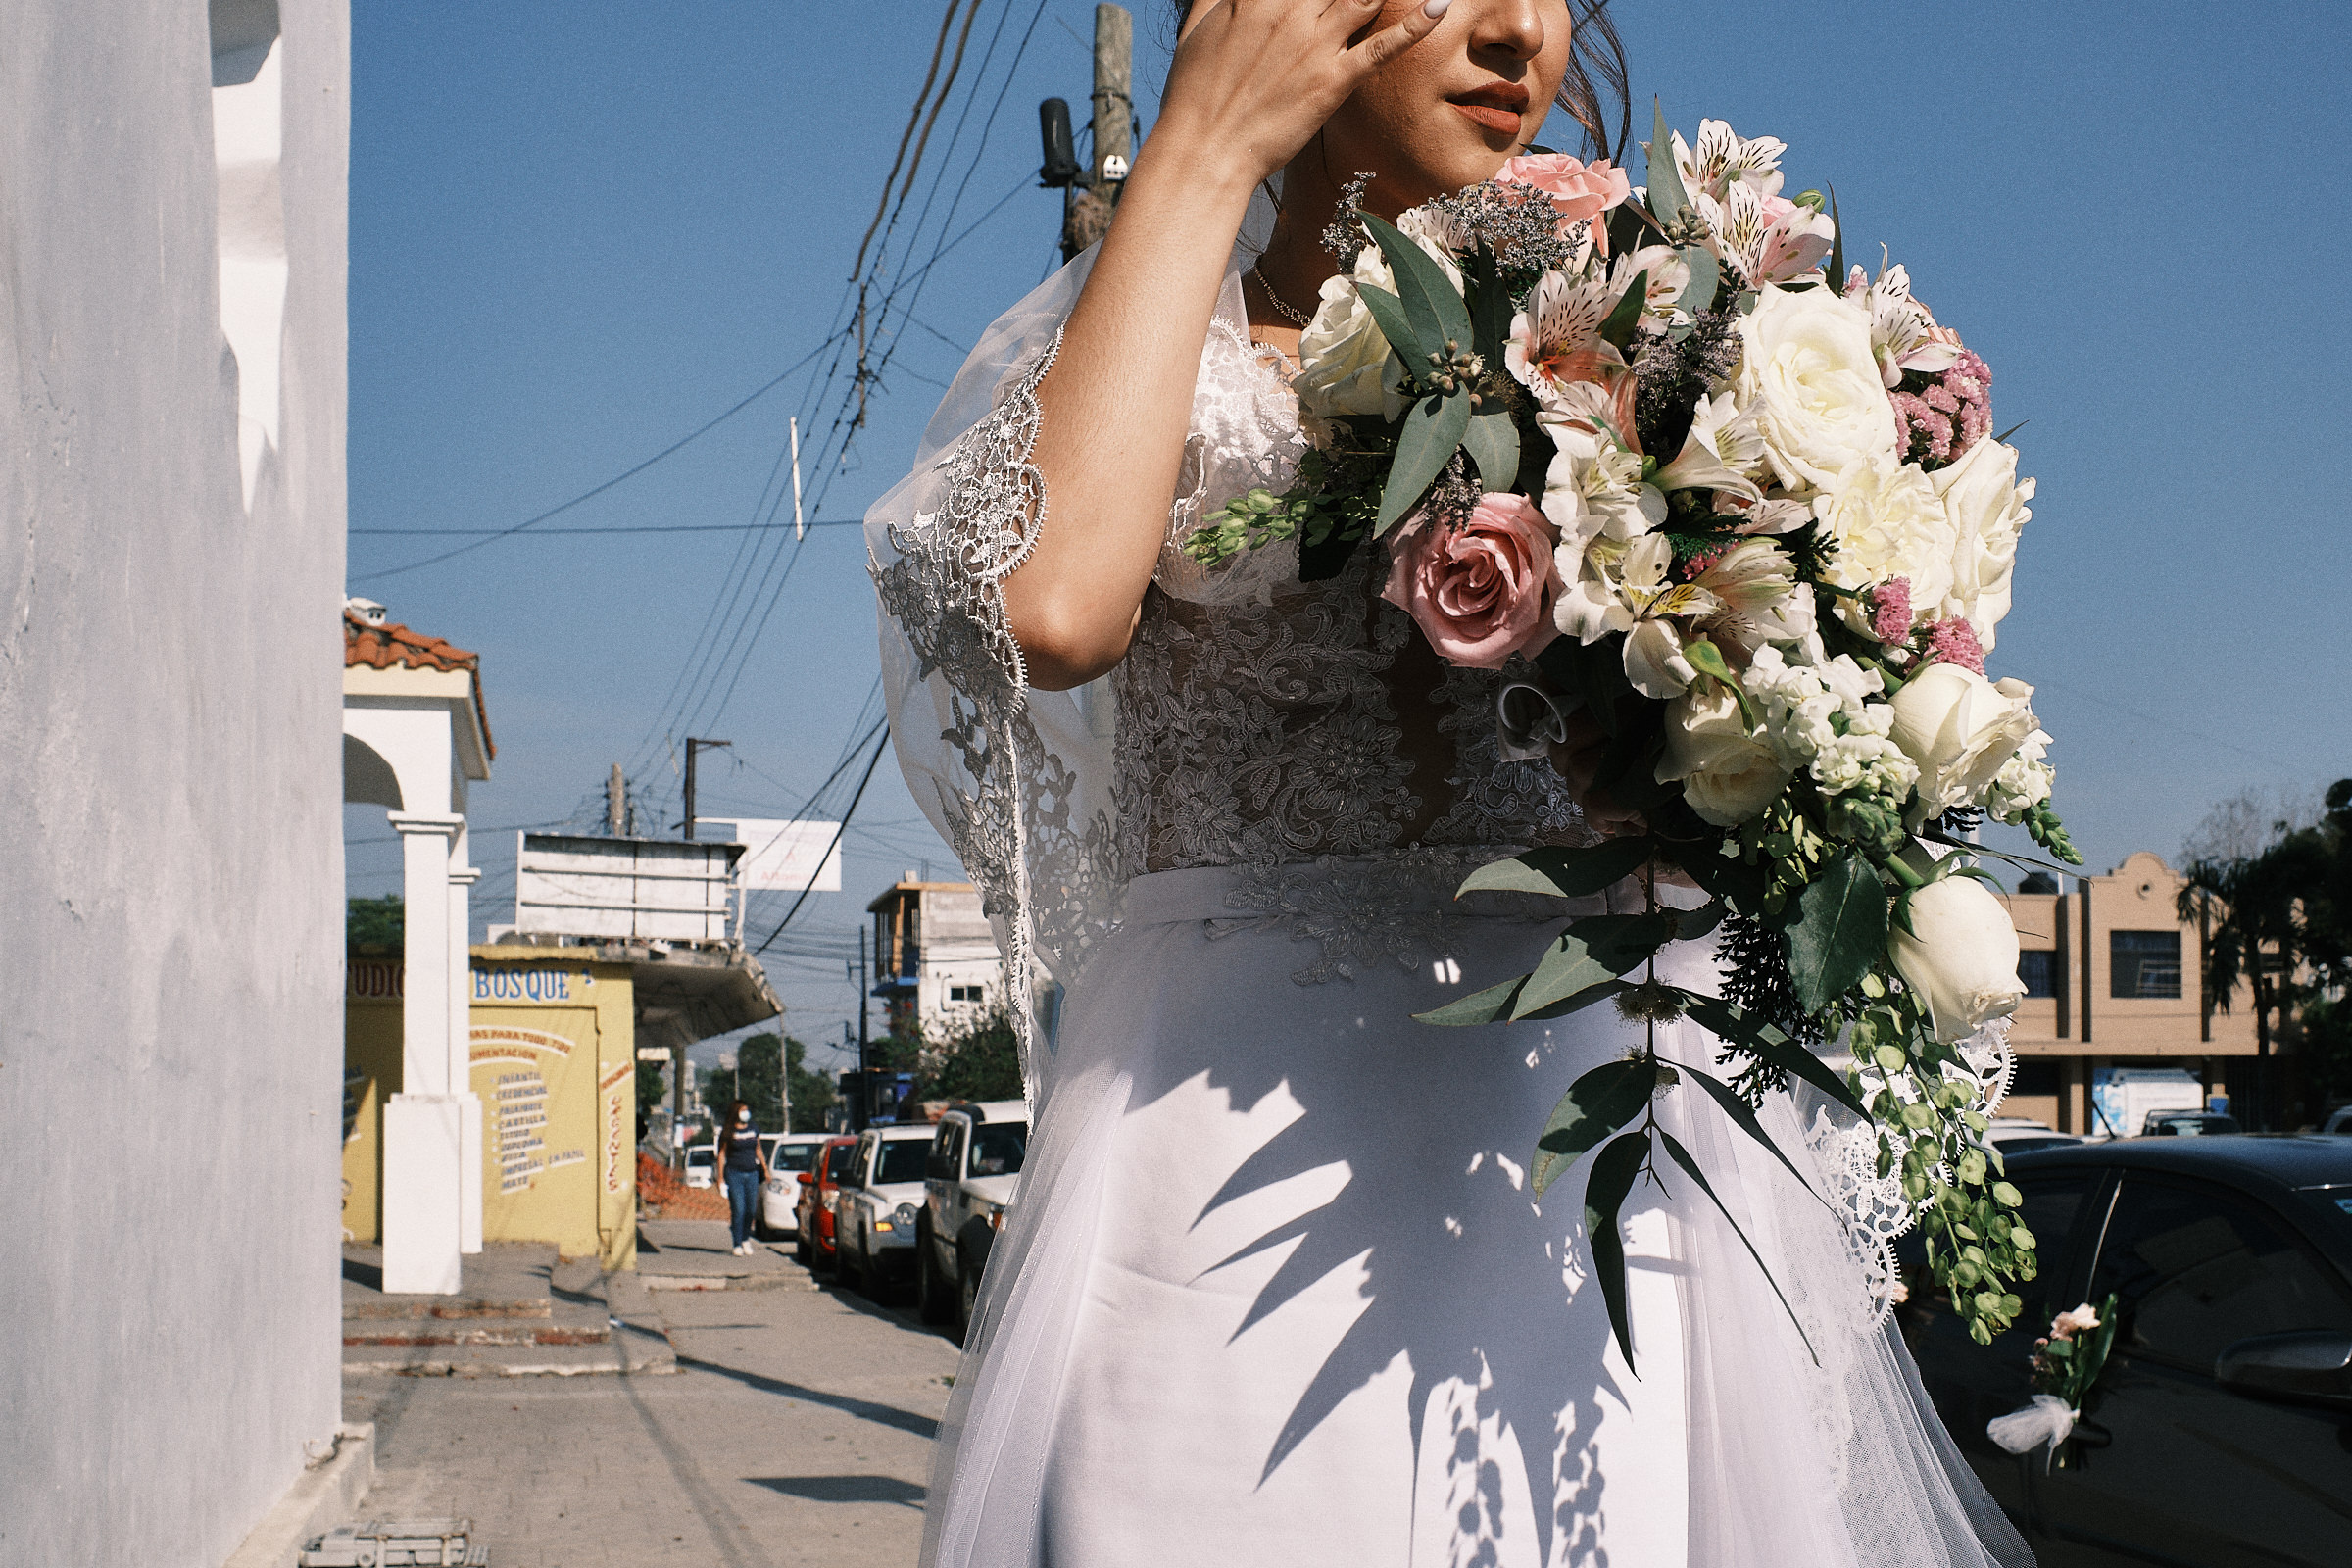 Bride Holds Bouquet Of Flowers And Waits Outside The Church